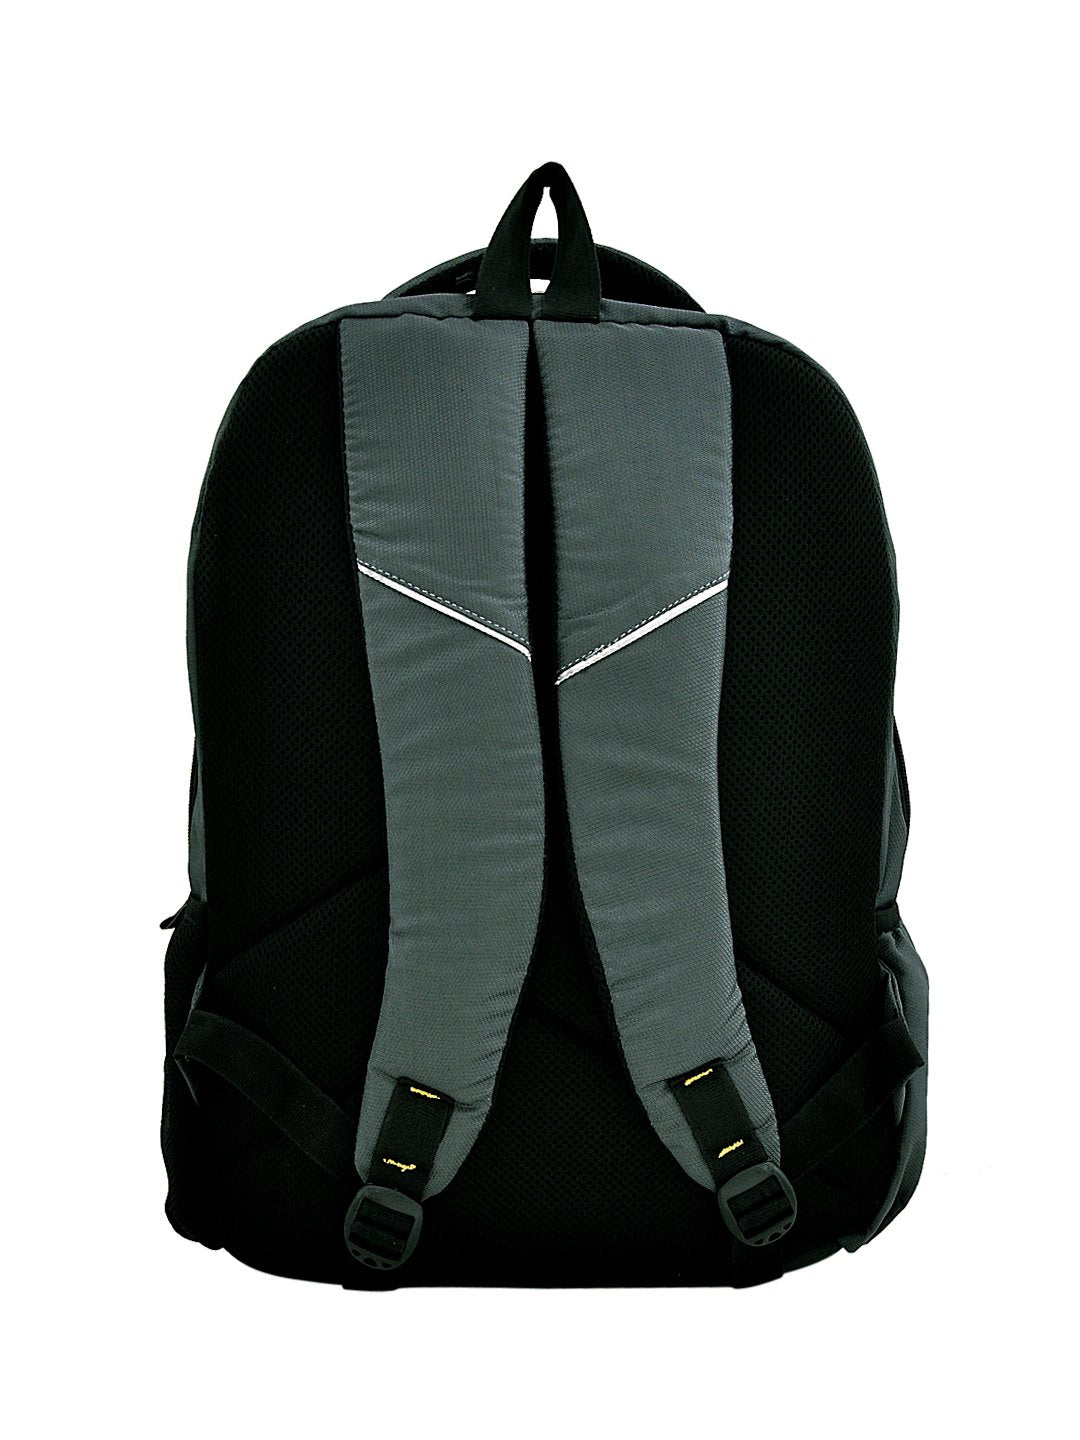 Grey Multi compartment Laptop Backpack